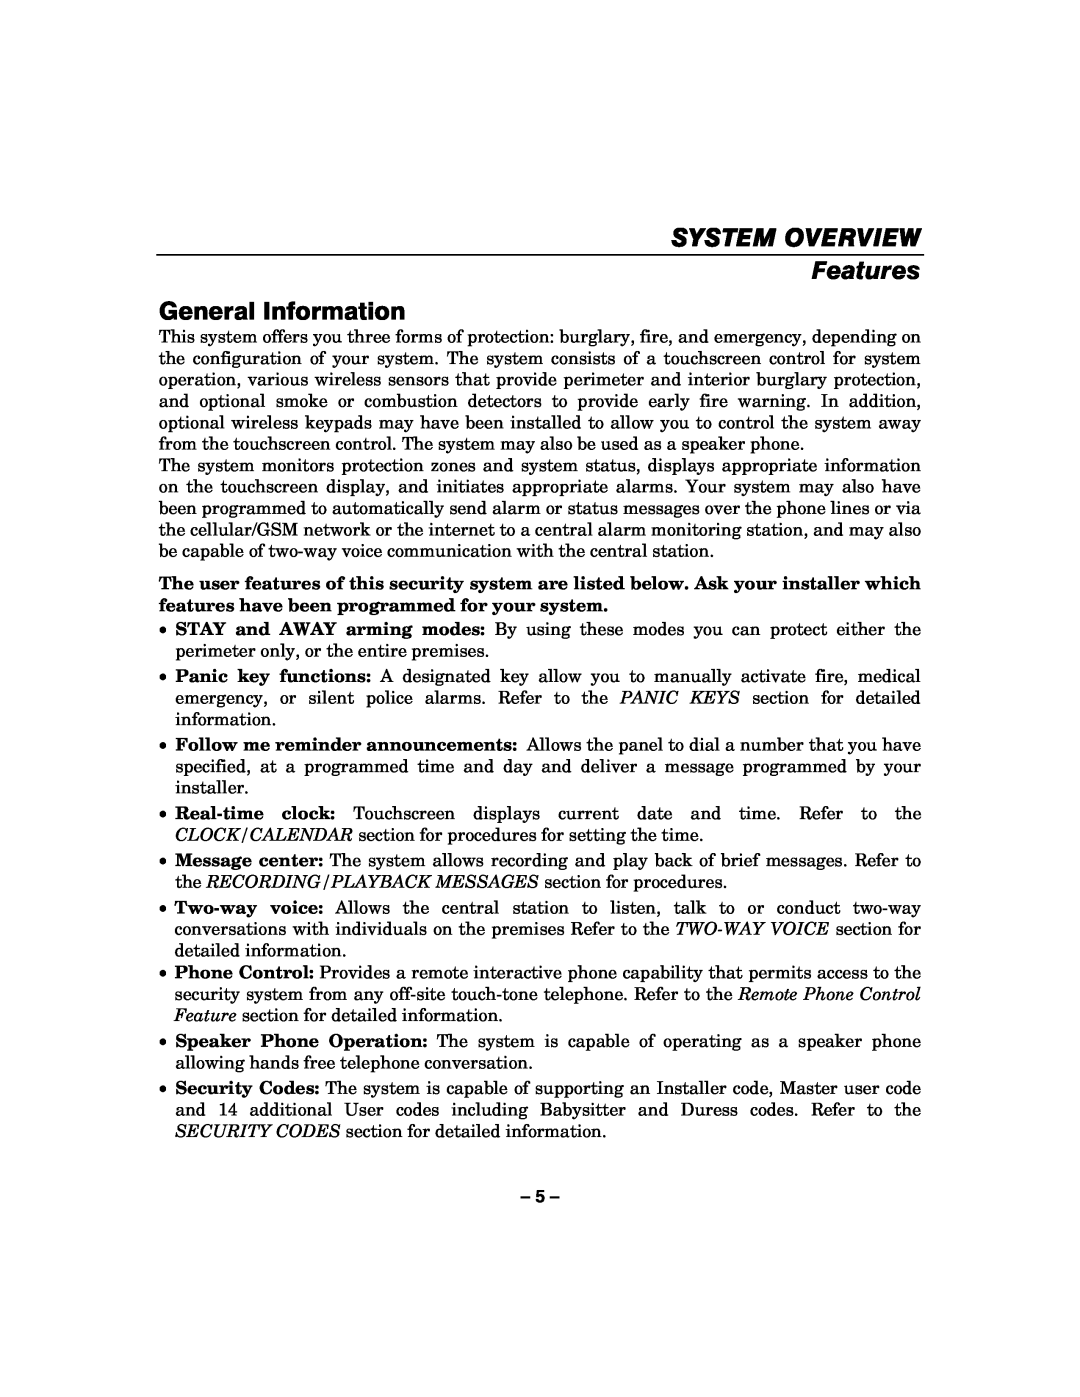 Honeywell 800-06894 manual SYSTEM OVERVIEW Features, General Information 